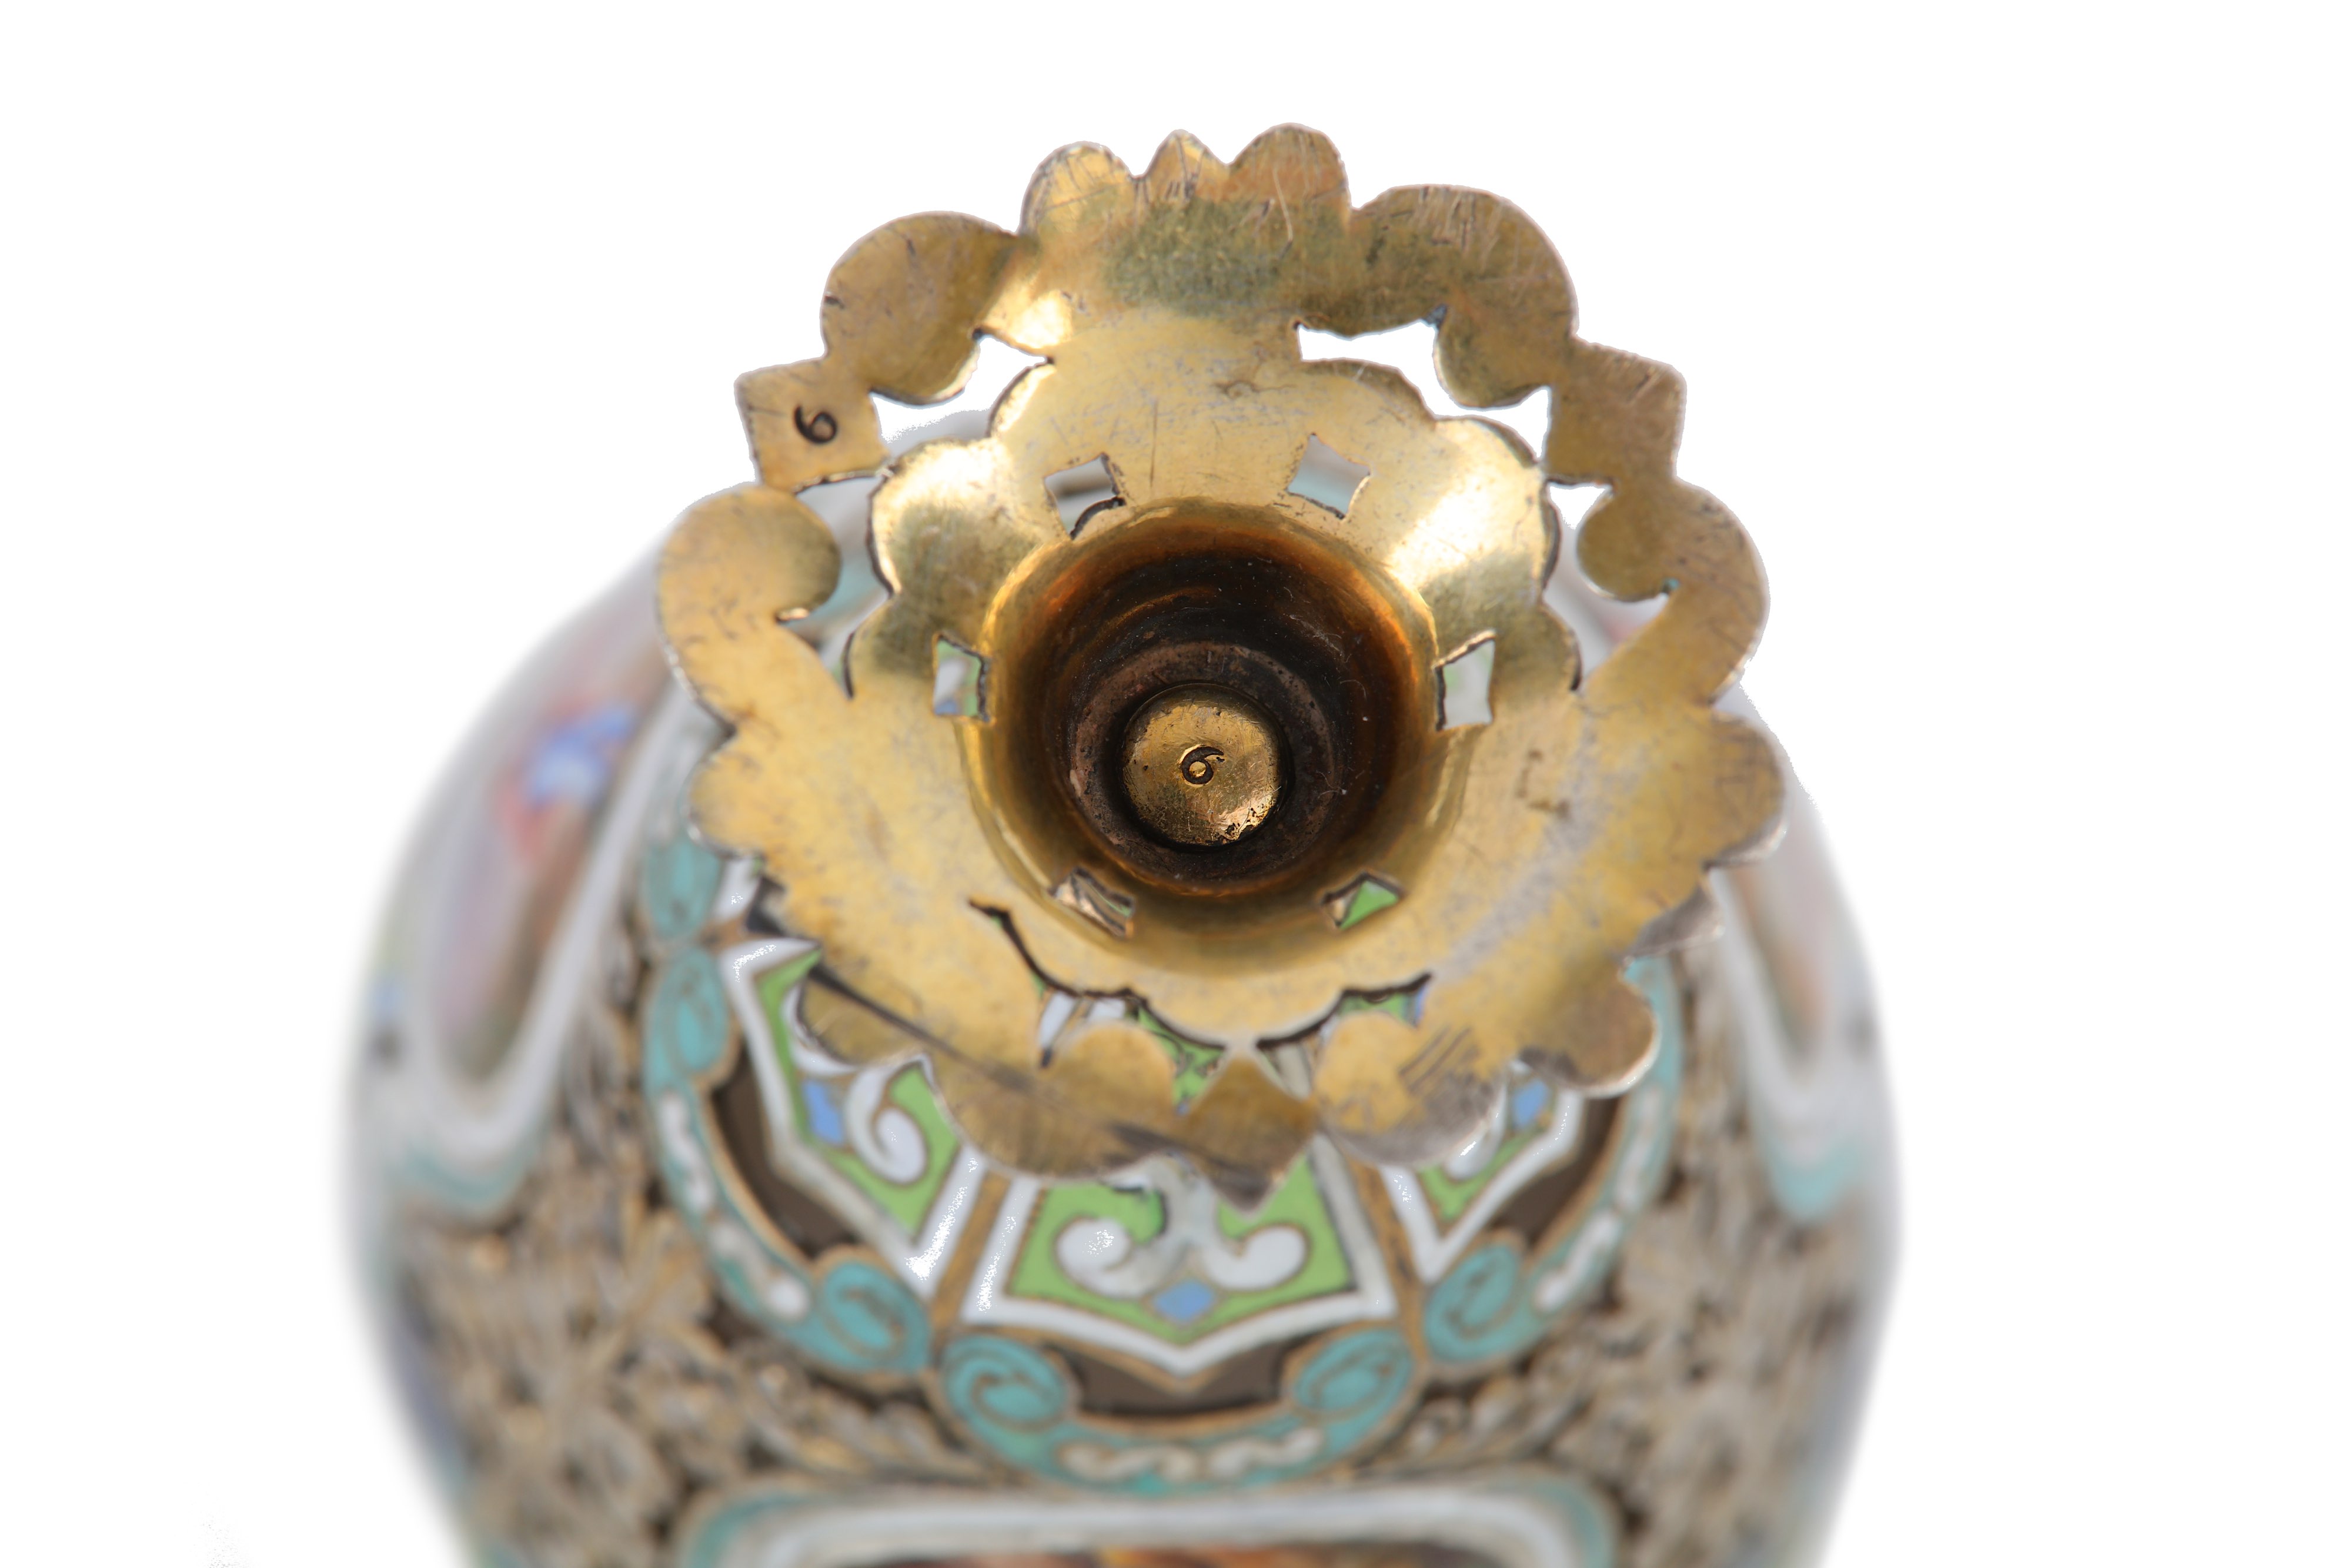 An early 20th century continental unmarked silver-gilt and enamel zarf, possibly Swiss - Image 3 of 3